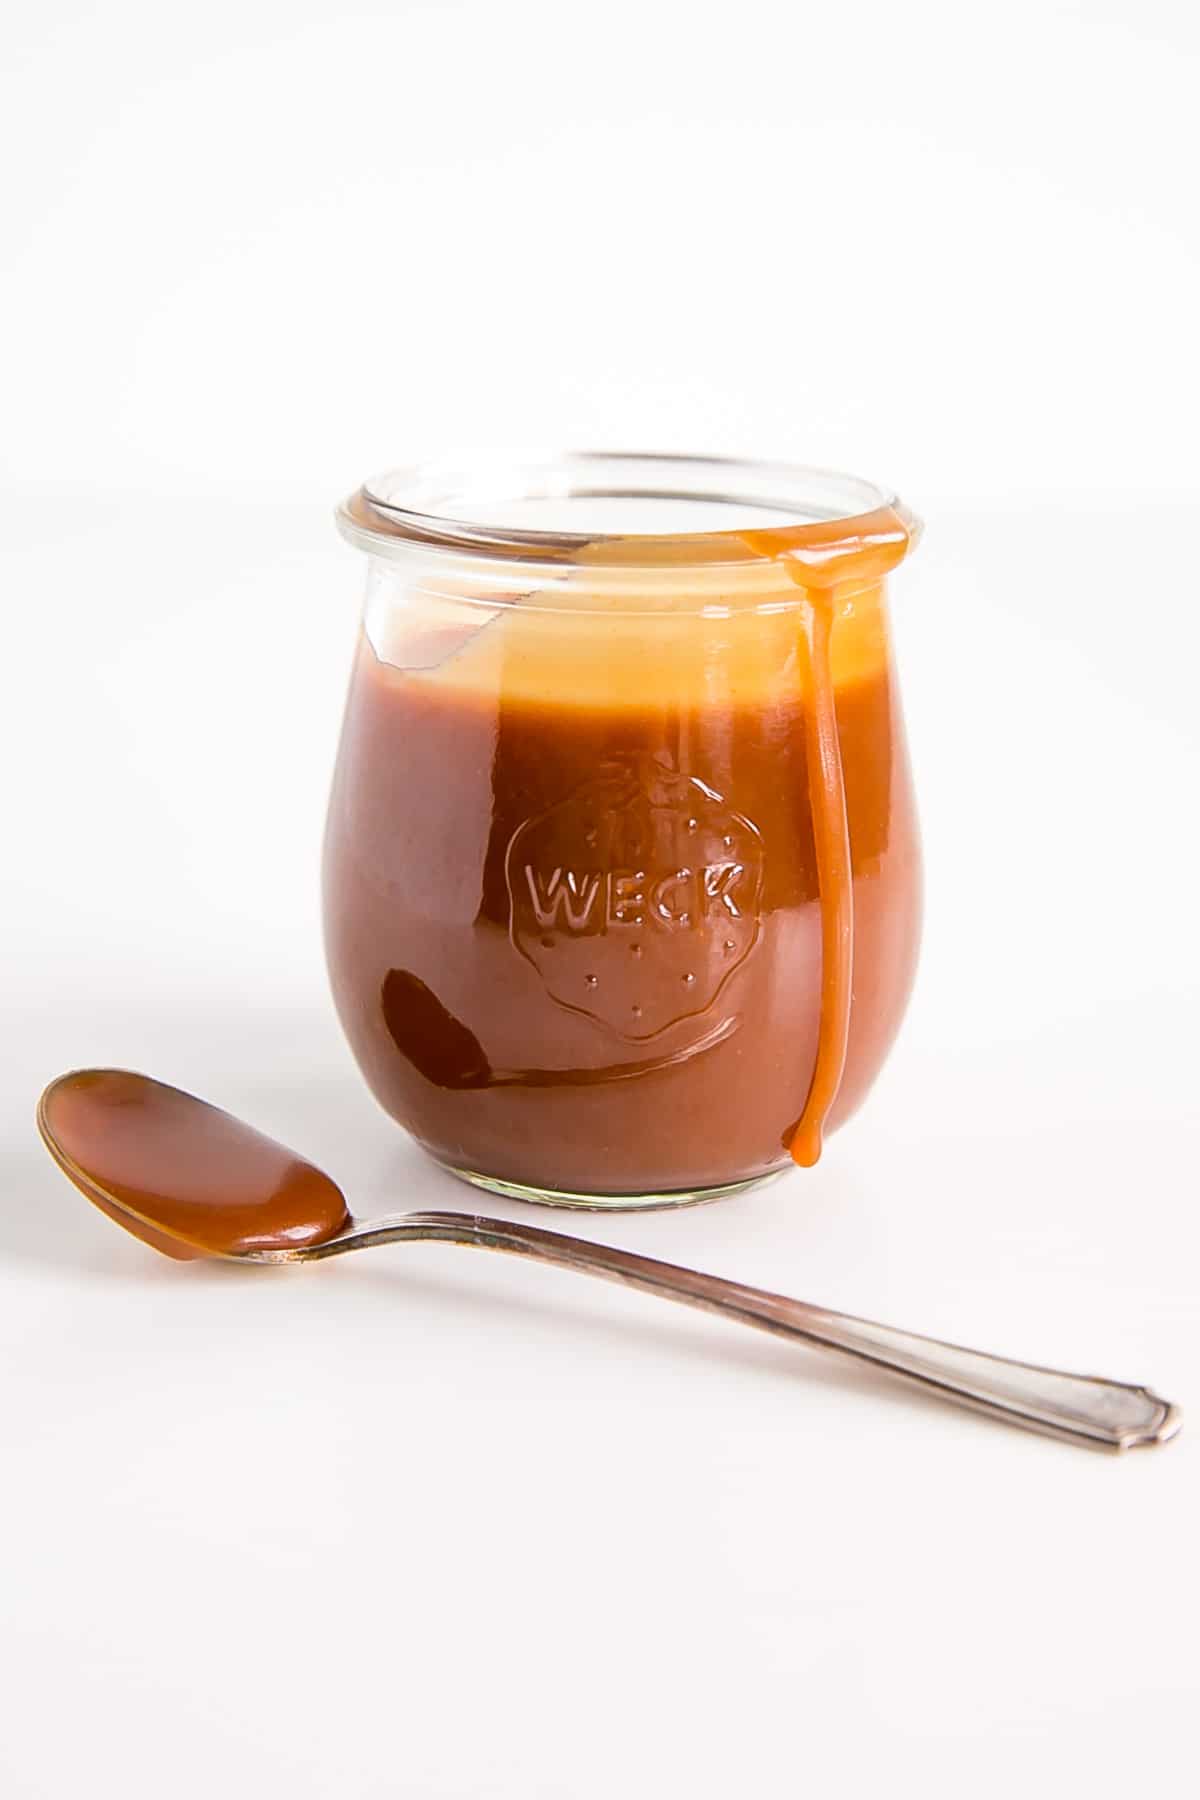 Caramel sauce in a jar with a spoon next to it.